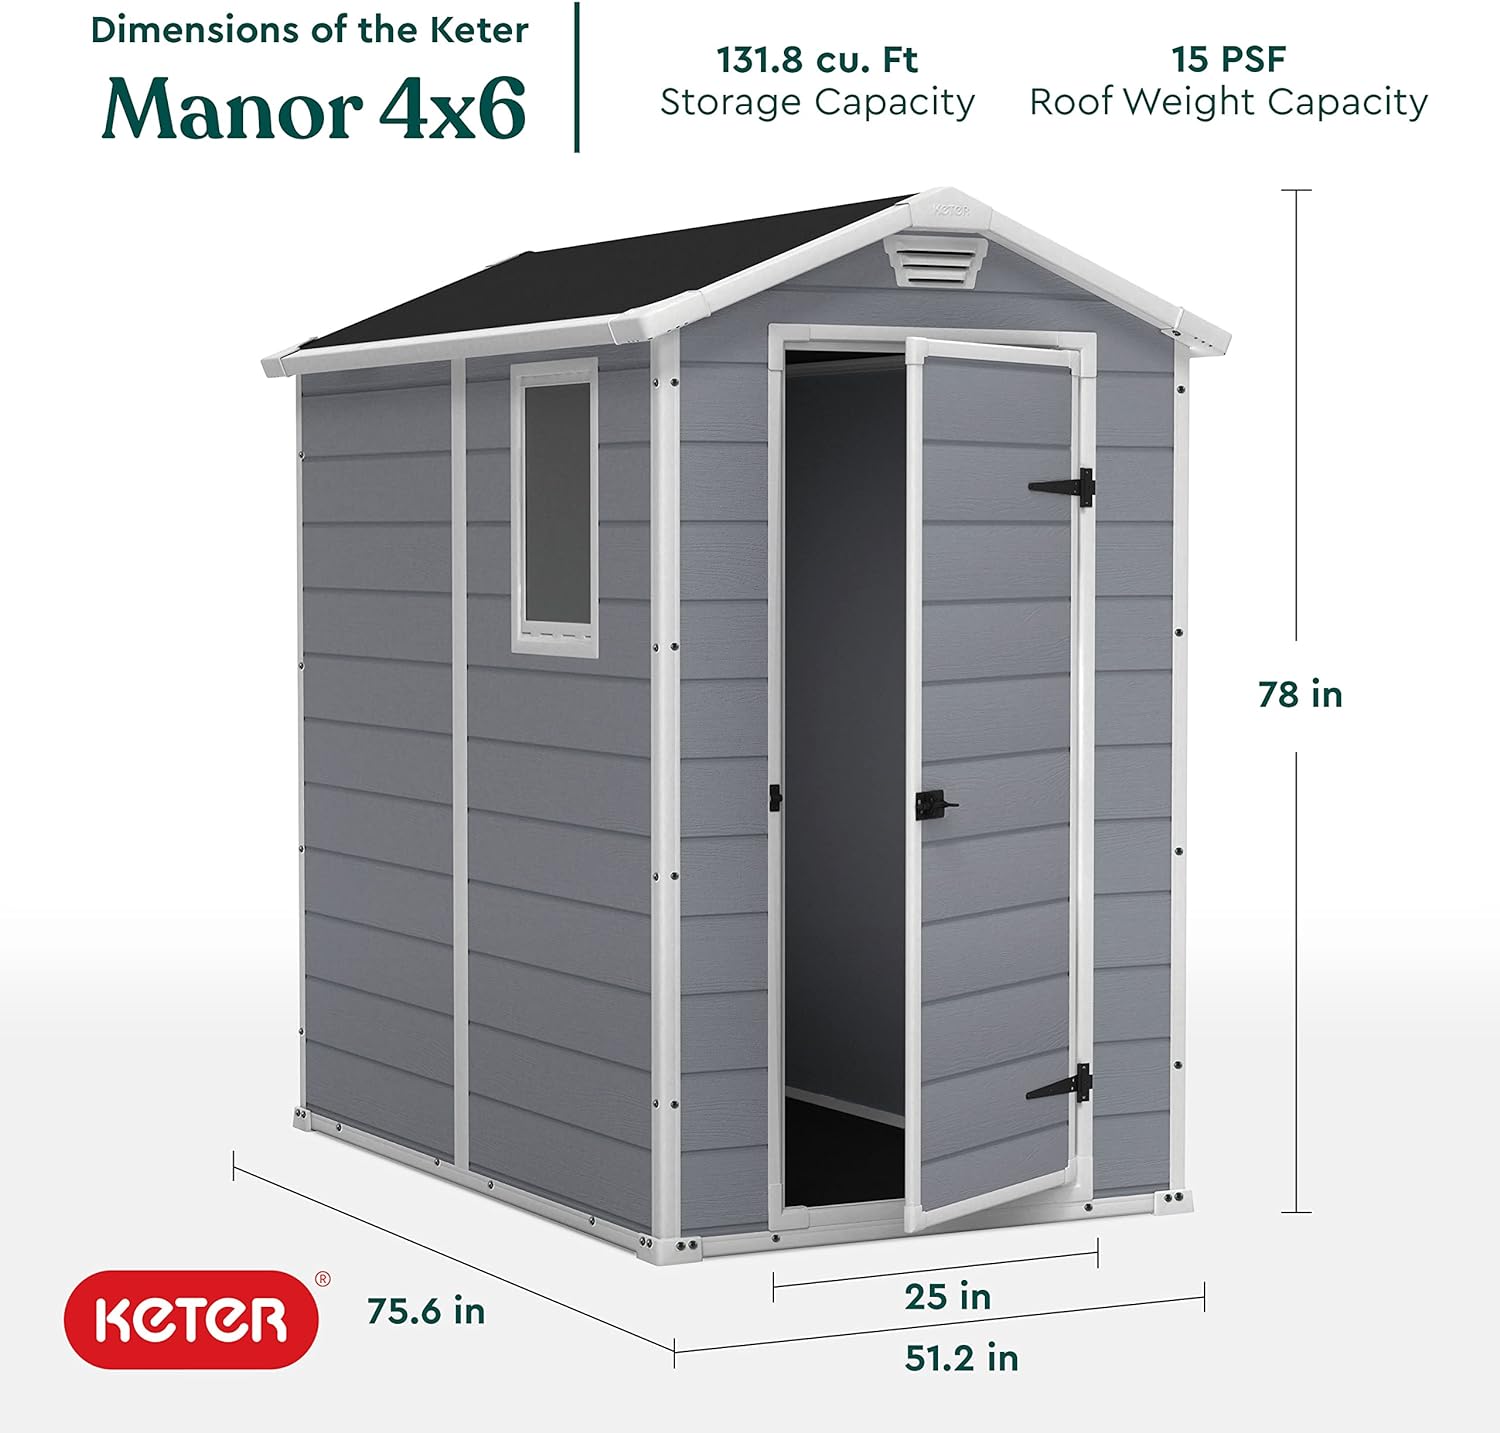 4x6 shed dimensions